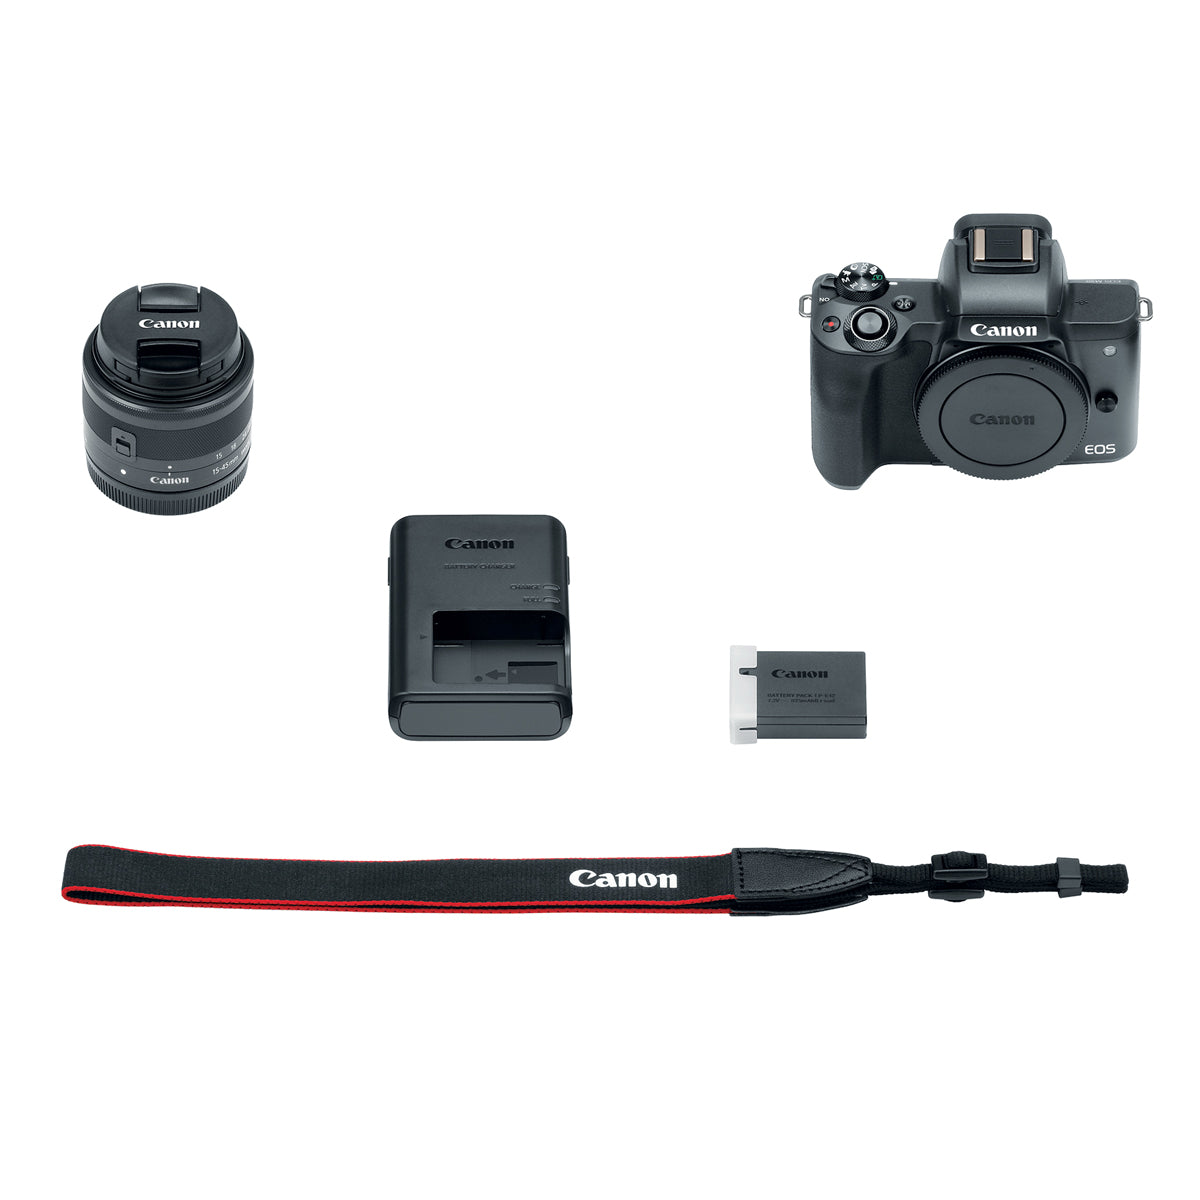 Canon EOS M50 with EF-M 15-45mm IS STM Lens Kit (Black)